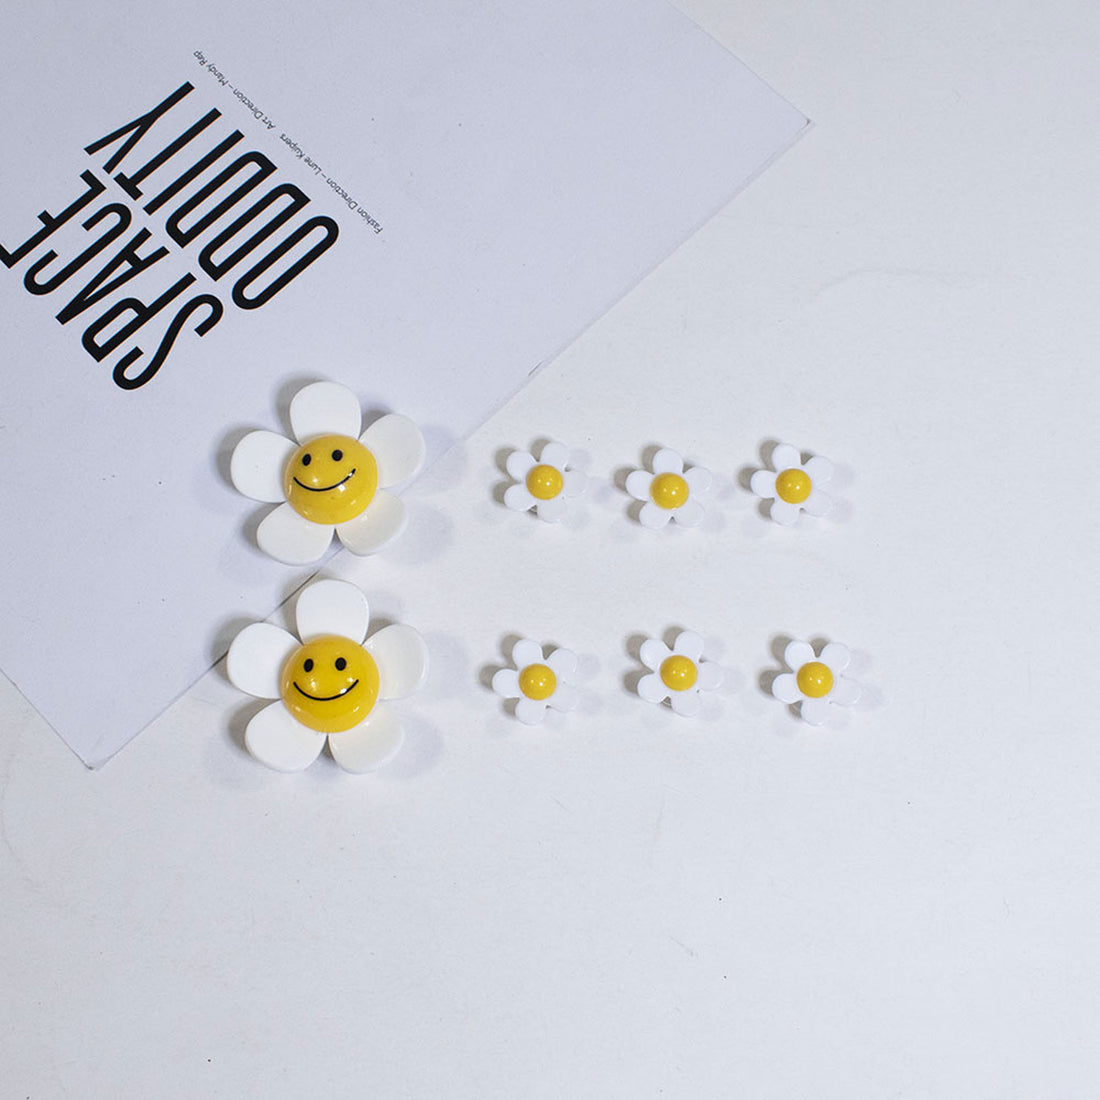 Acrylic Smiley Crocs Shoes Charms Decoration 1pack